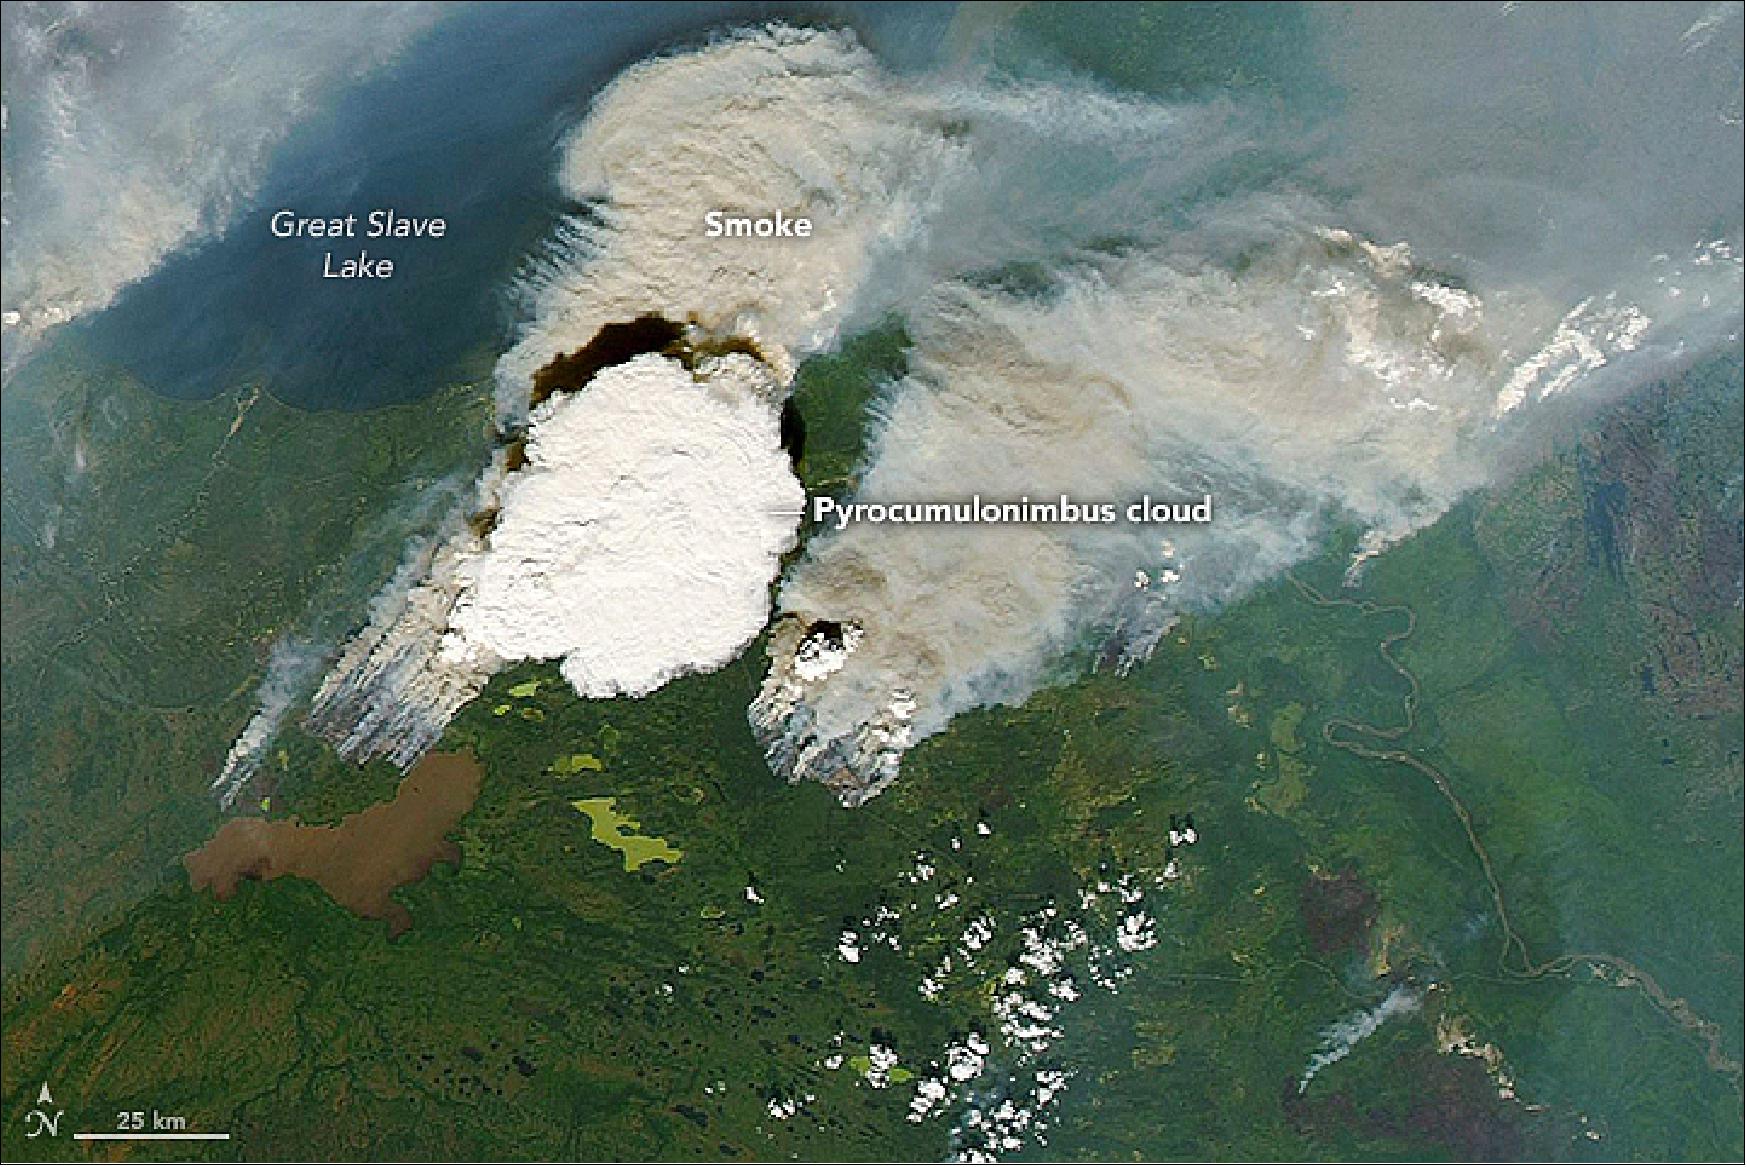 Figure 111: Energy from the Sun-warmed ground is not the only way to get air masses to lift, cool, and form clouds. That energy can also come from the heat of a volcano or, in this case, fire. NASA's Aqua satellite captured this image of a pyrocumulonimbus cloud on August 5, 2014, south of Yellowknife, Canada (image credit: NASA Earth Observatory, images by Joshua Stevens and Jeff Schmaltz, using MODIS data from LANCE/EOSDIS Rapid Response)